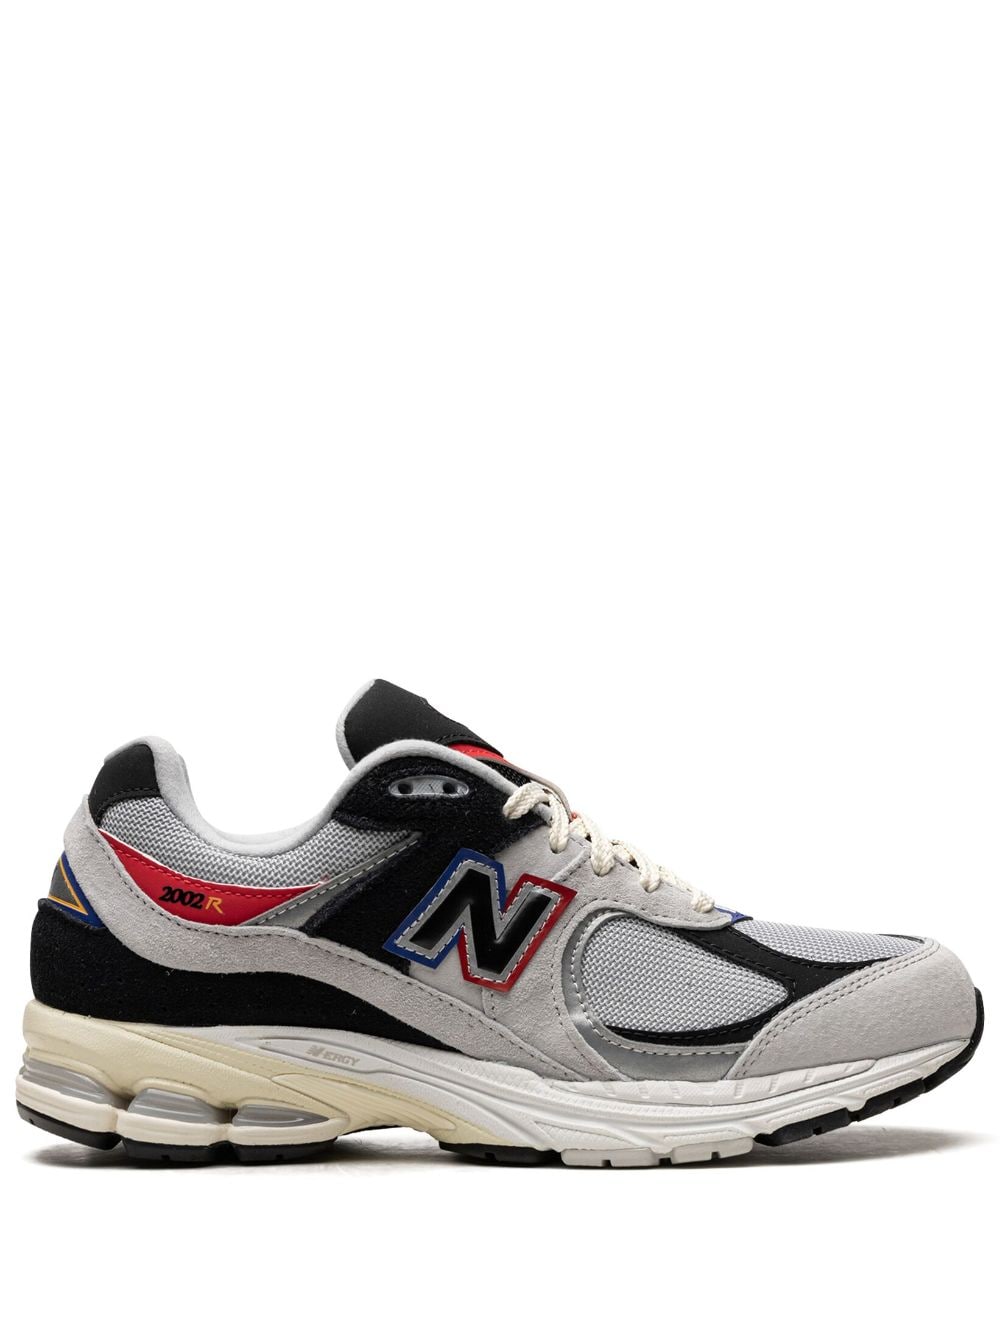 New Balance 2002R "DTLR - Virginia Is For Lovers" sneakers - Black von New Balance